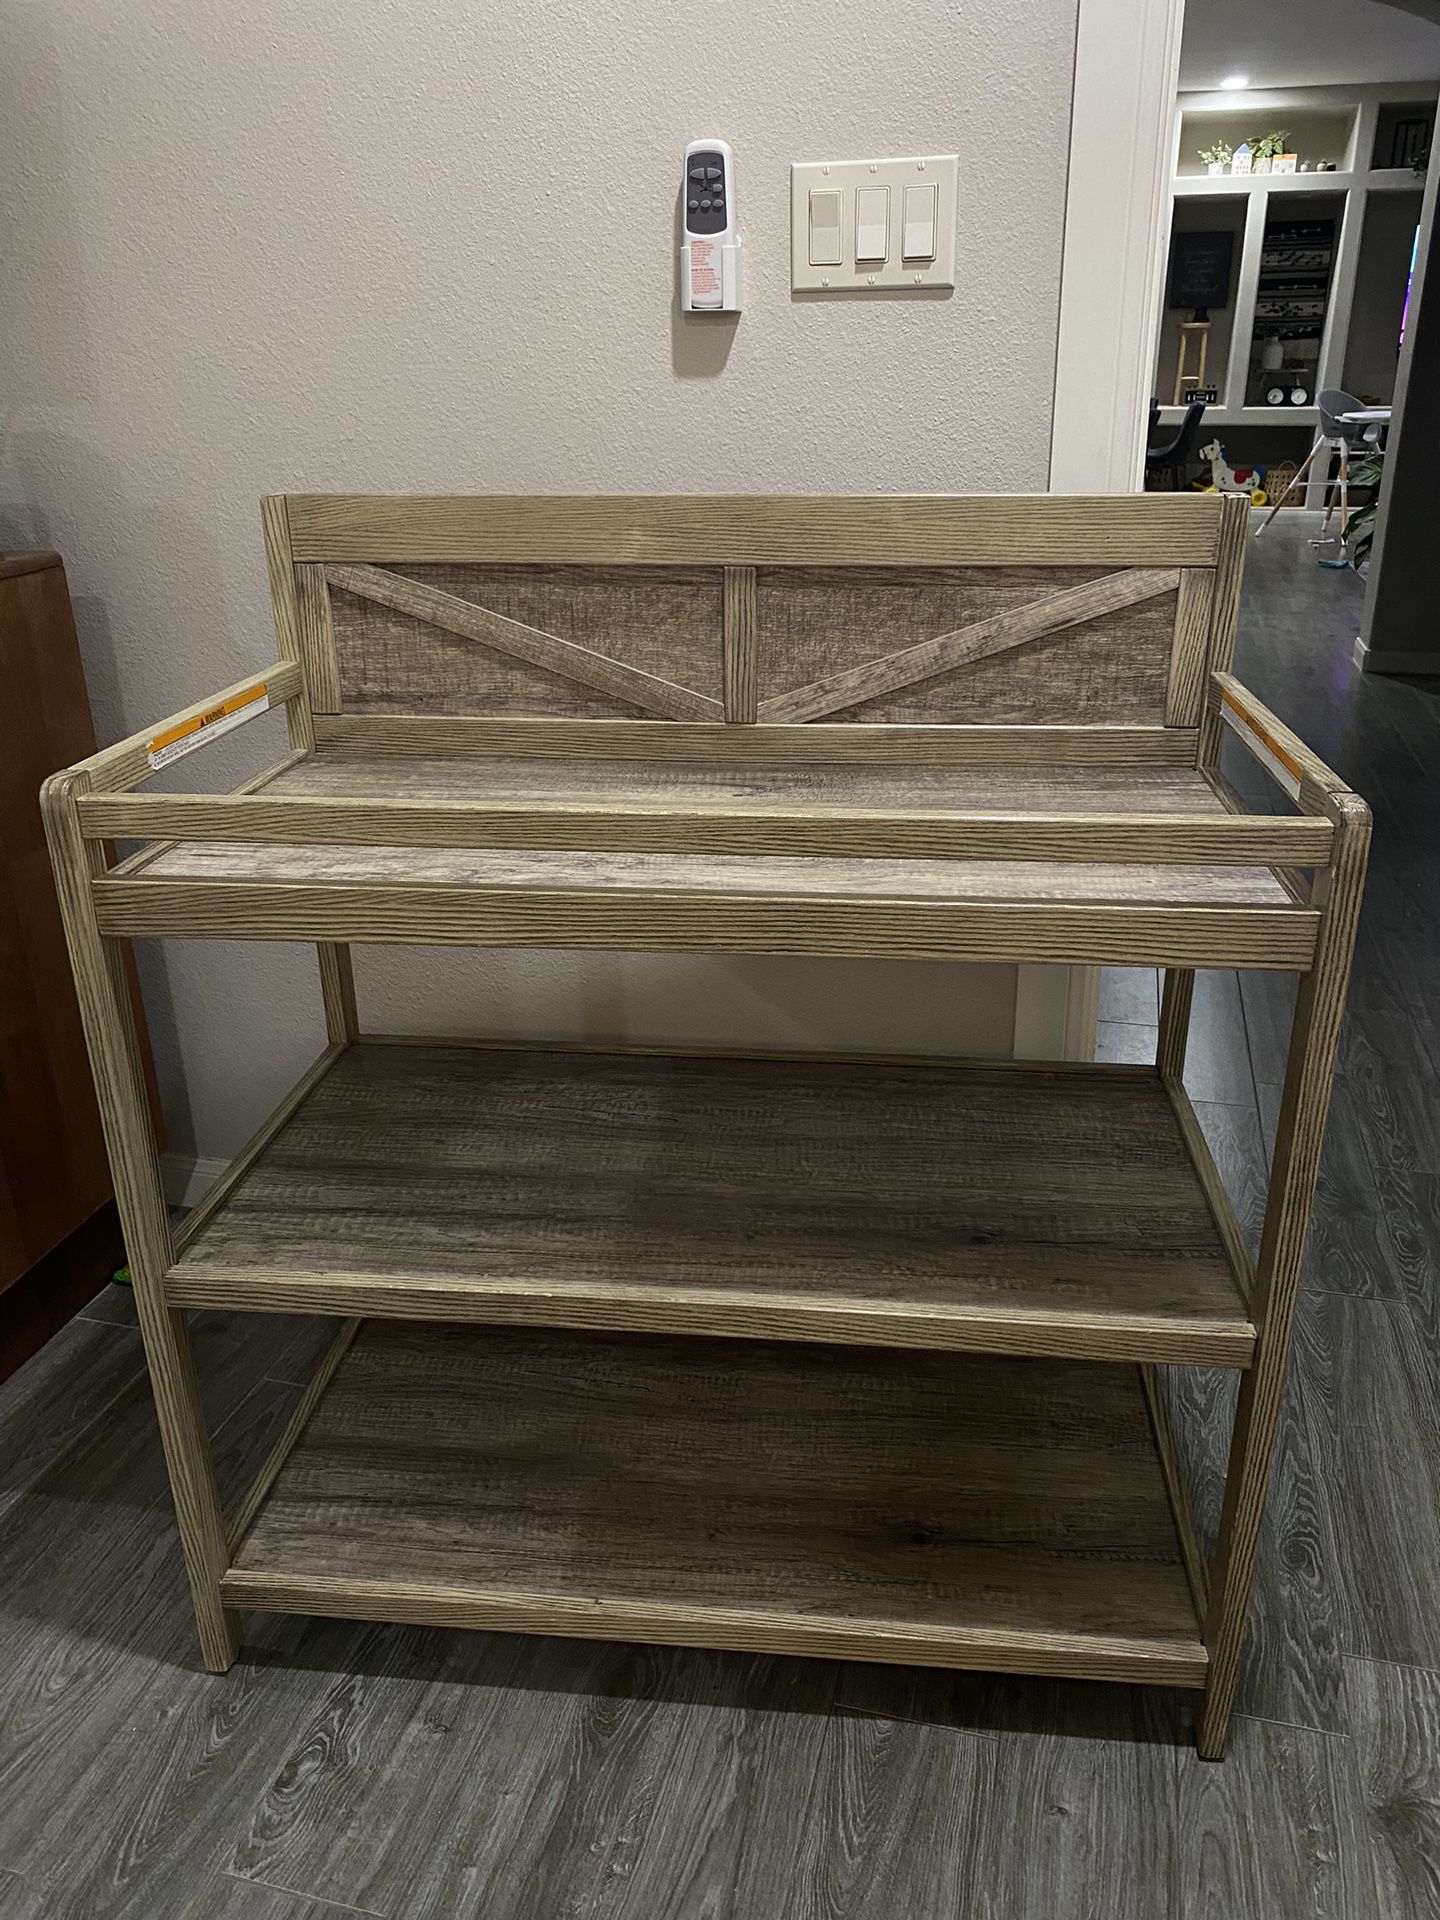 Heritage Baby Changing Table